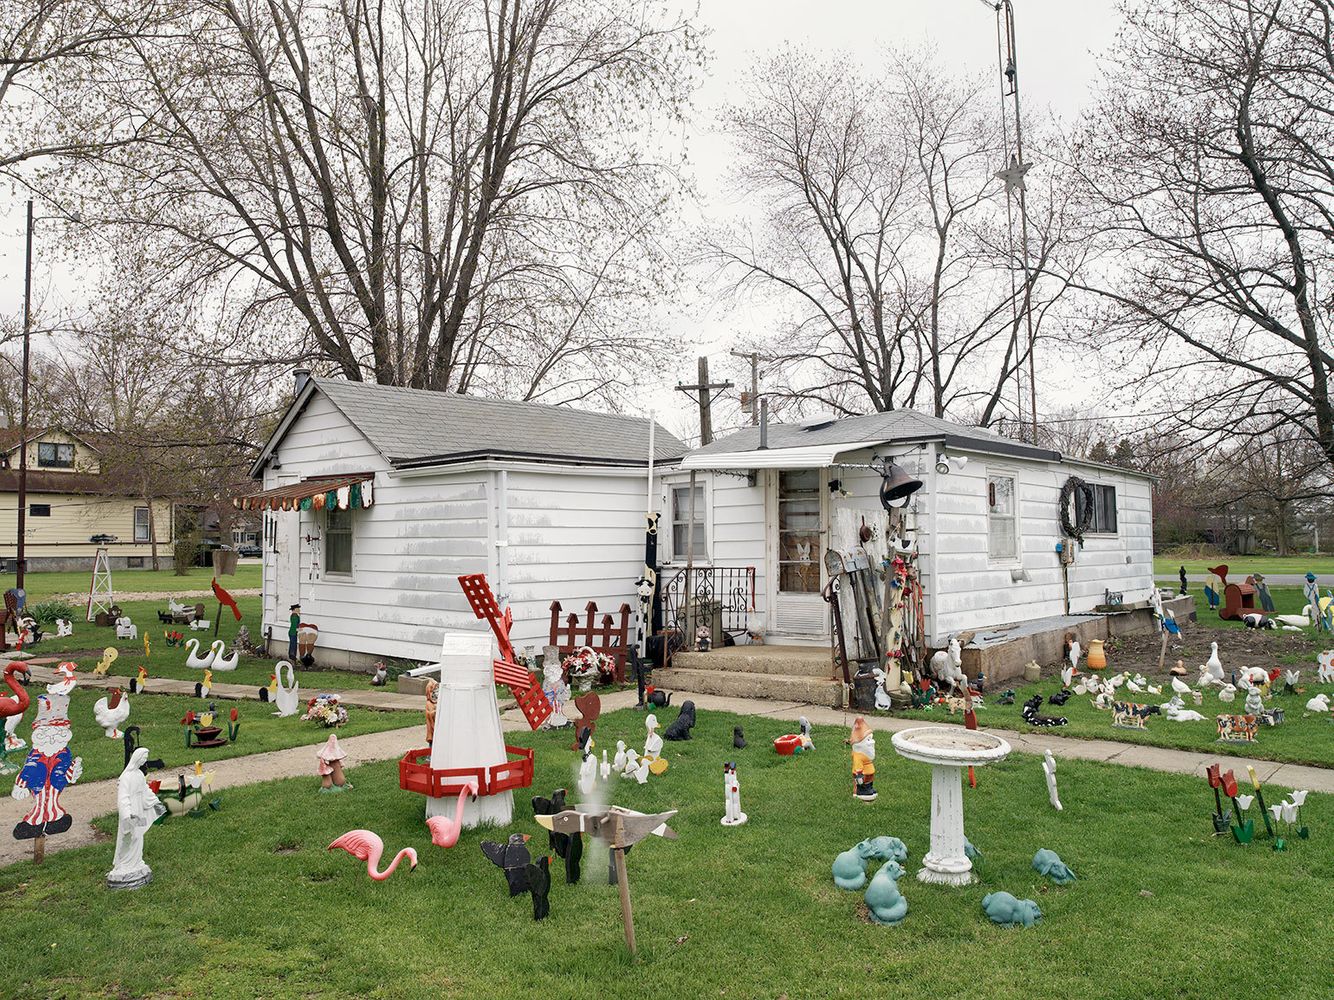 House with Lawn Ornaments, Long Point, IL 2007